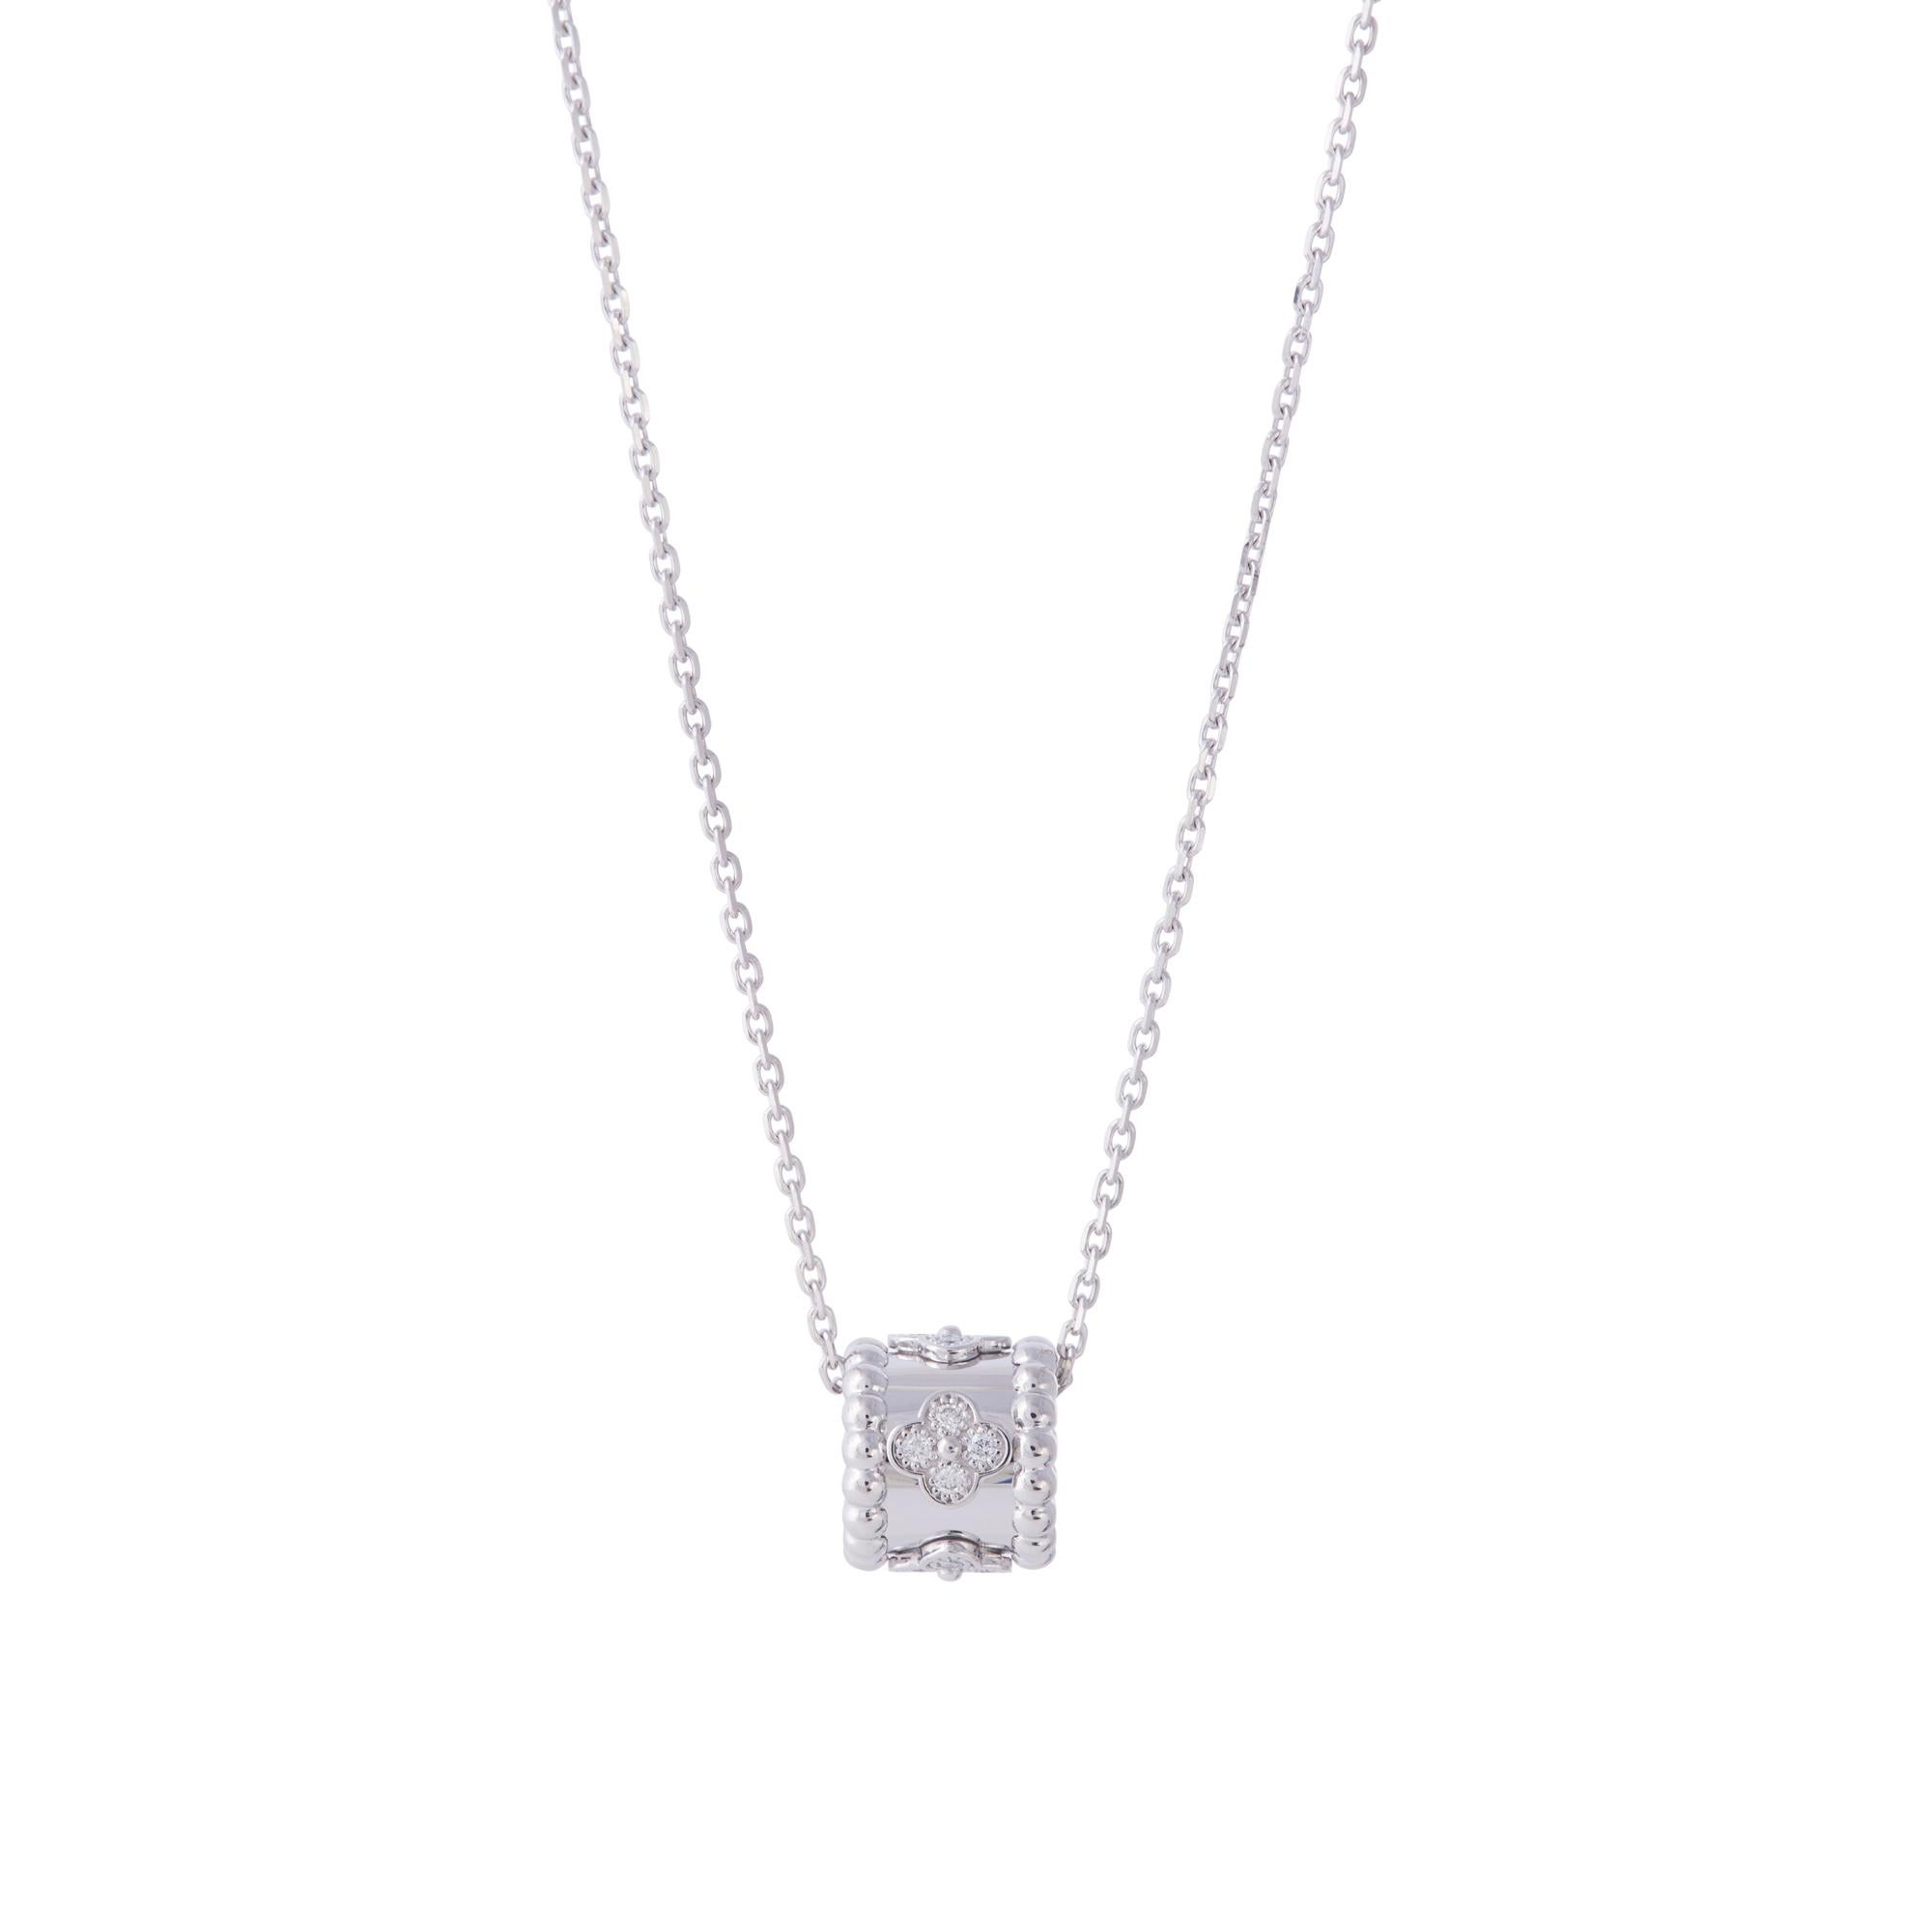 Authentic Van Cleef & Arpels Perlée Clovers pendant necklace crafted in 18 karat white gold and set with an estimated 0.19 carats of round brilliant diamonds.   The pendant is situated on a delicate 18 karat white gold adjustable chain measuring